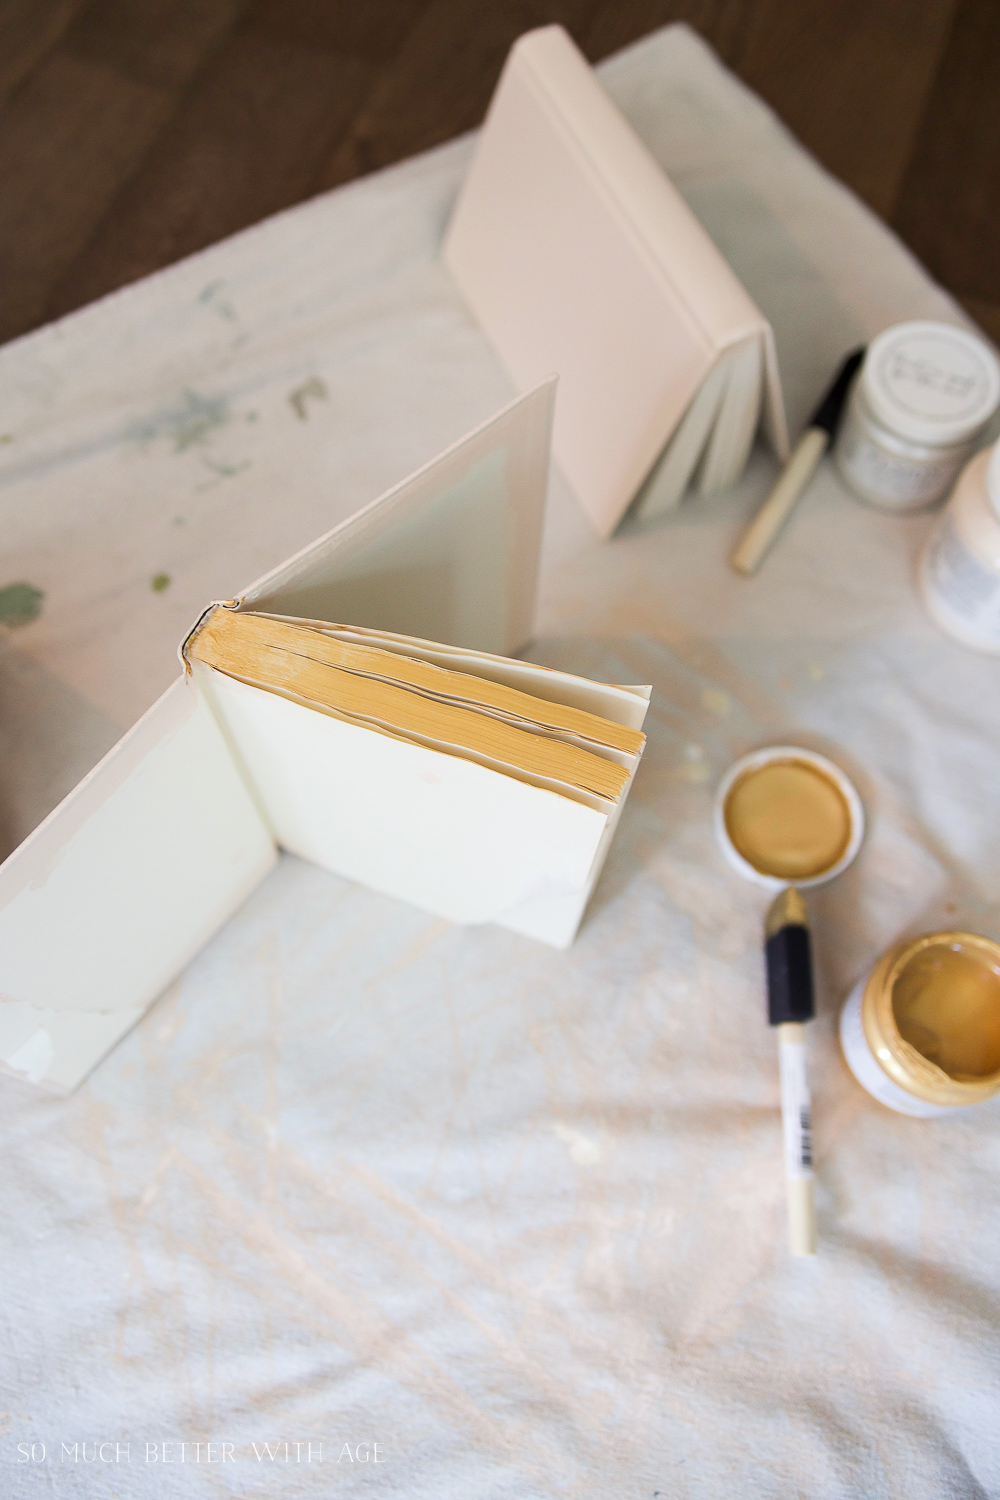 The old books being painted with gold paint.